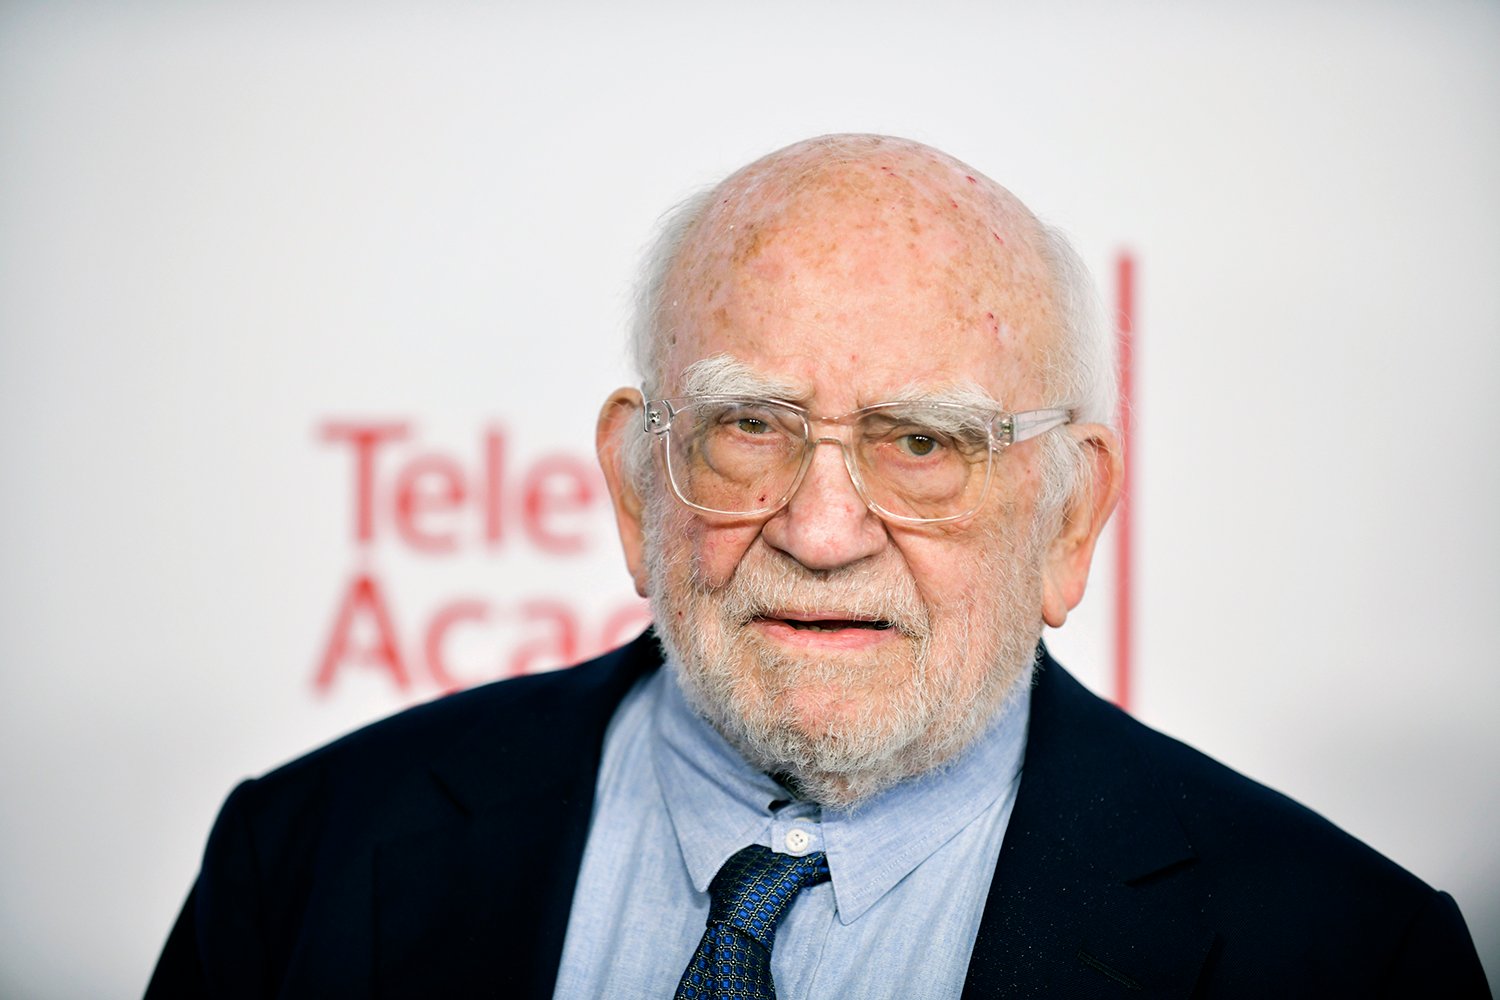 Ed Asner at the Television Academy's 25th Hall Of Fame Induction Ceremony